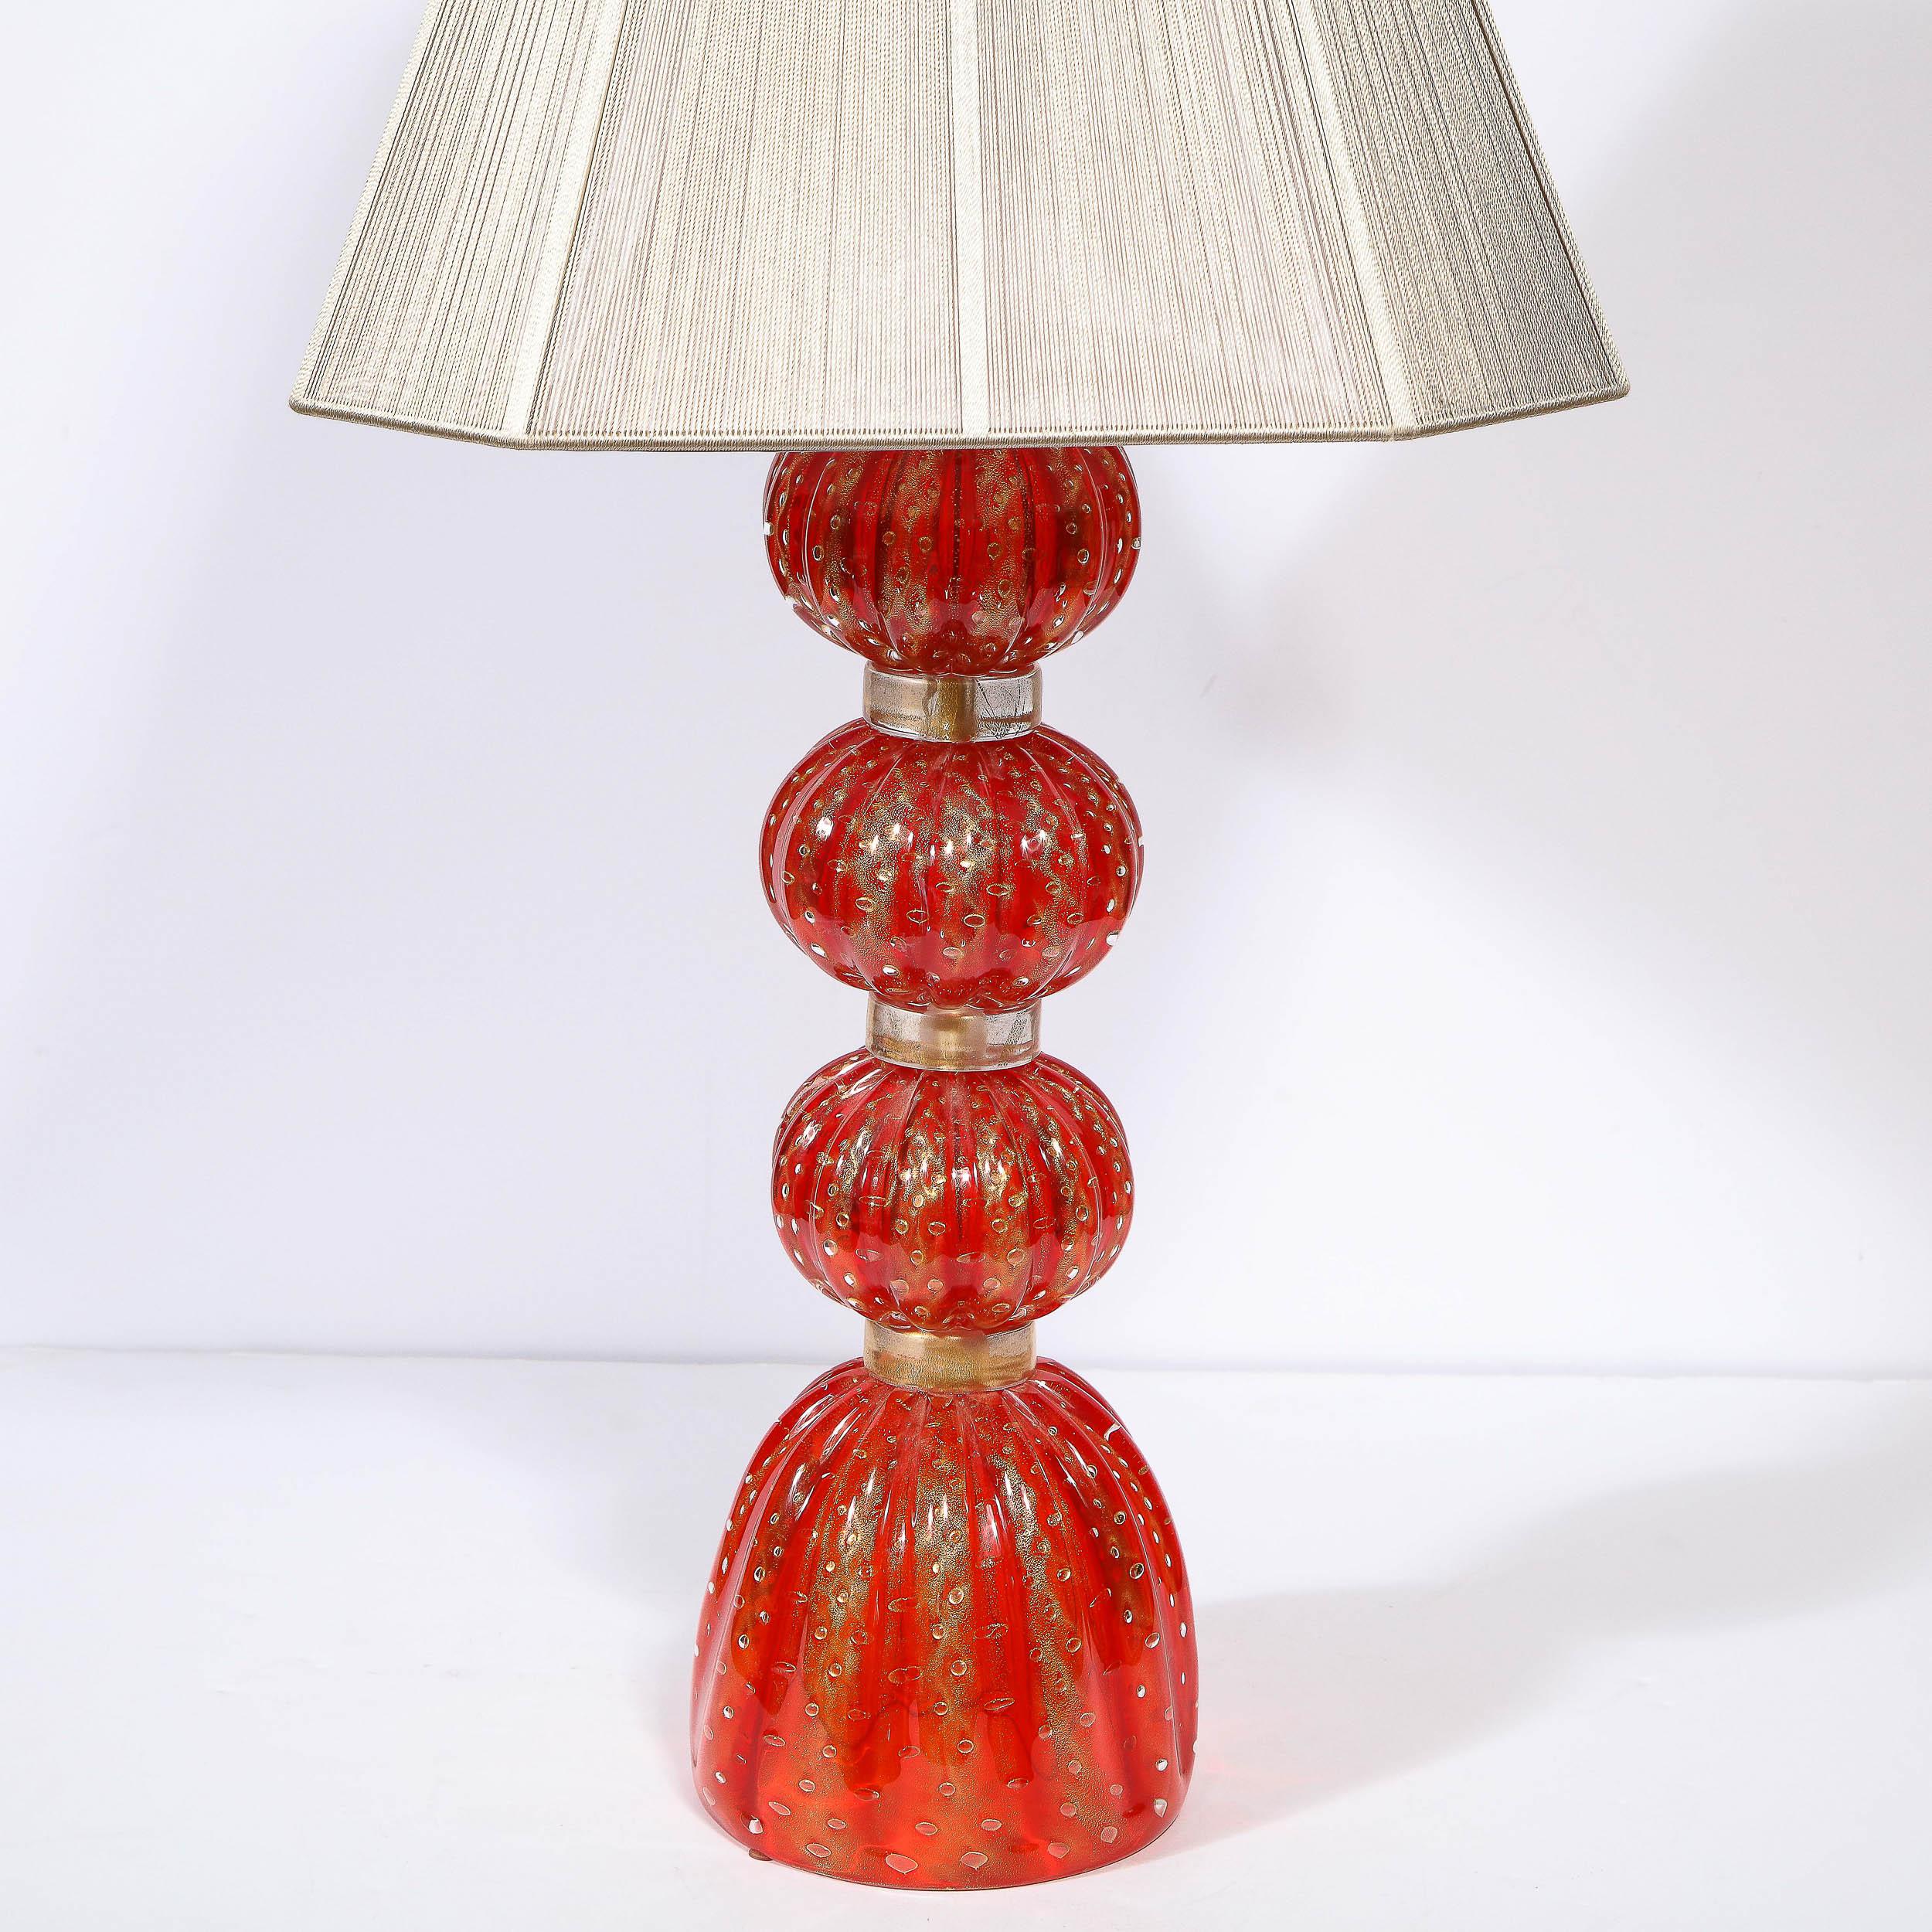 This beautiful modernist lamp was realized in Murano, Italy- the island off the coast of Venice renowned for centuries for its superlative glass production- during the latter half of the 20th century. It features a domed based upon which three